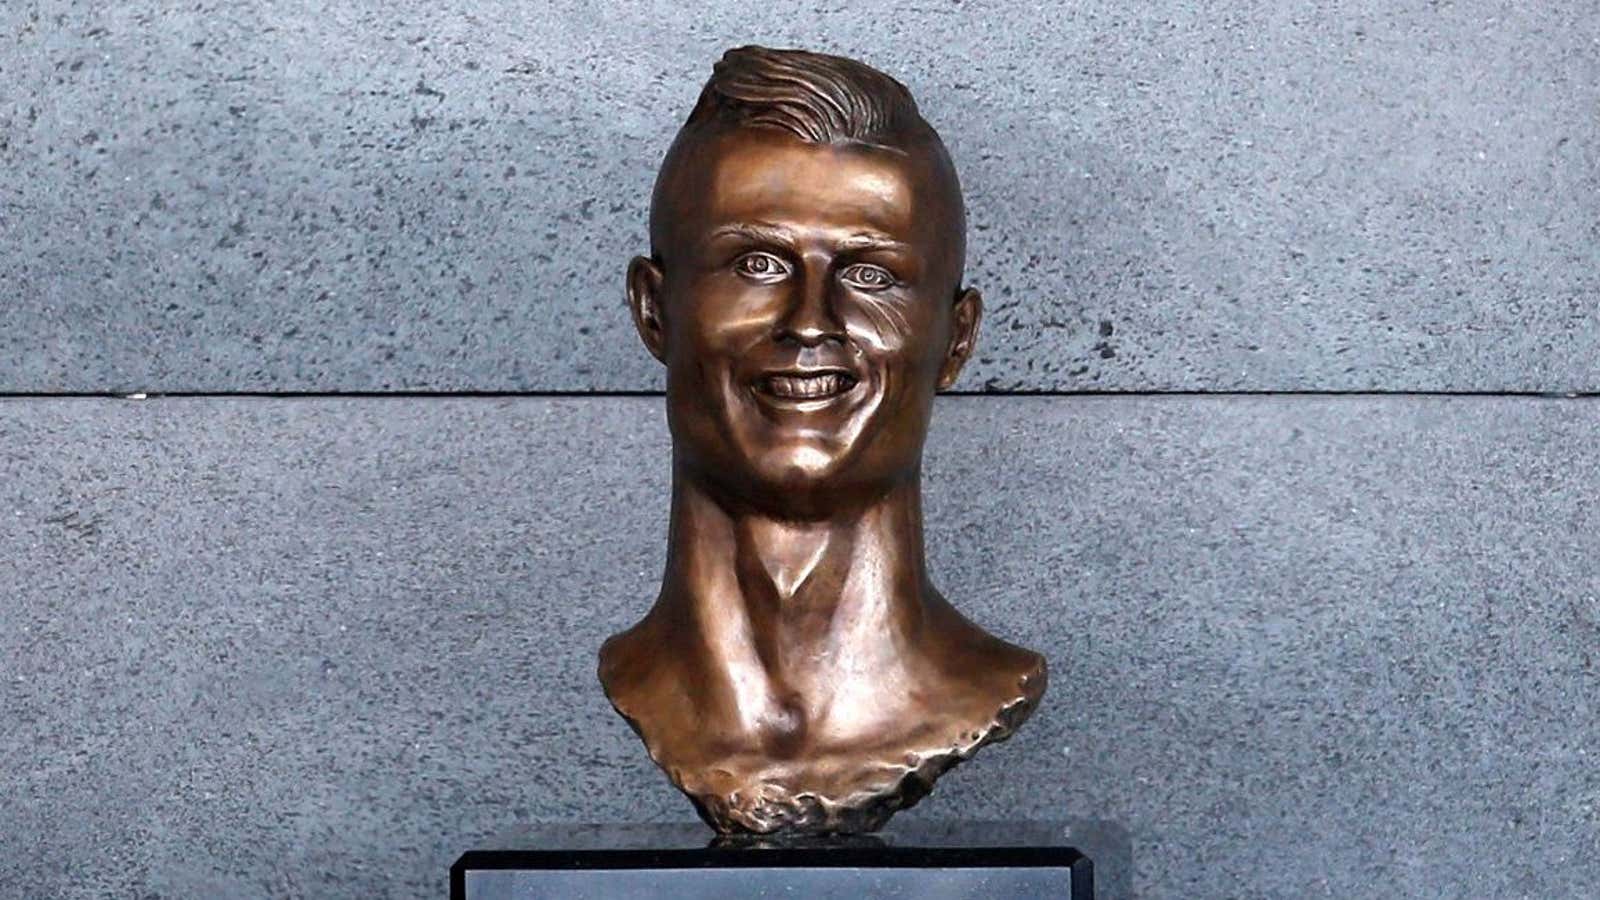 The Cristiano Ronaldo sculpture bust at the Madeira airport offers a lesson  in failing at your dream job